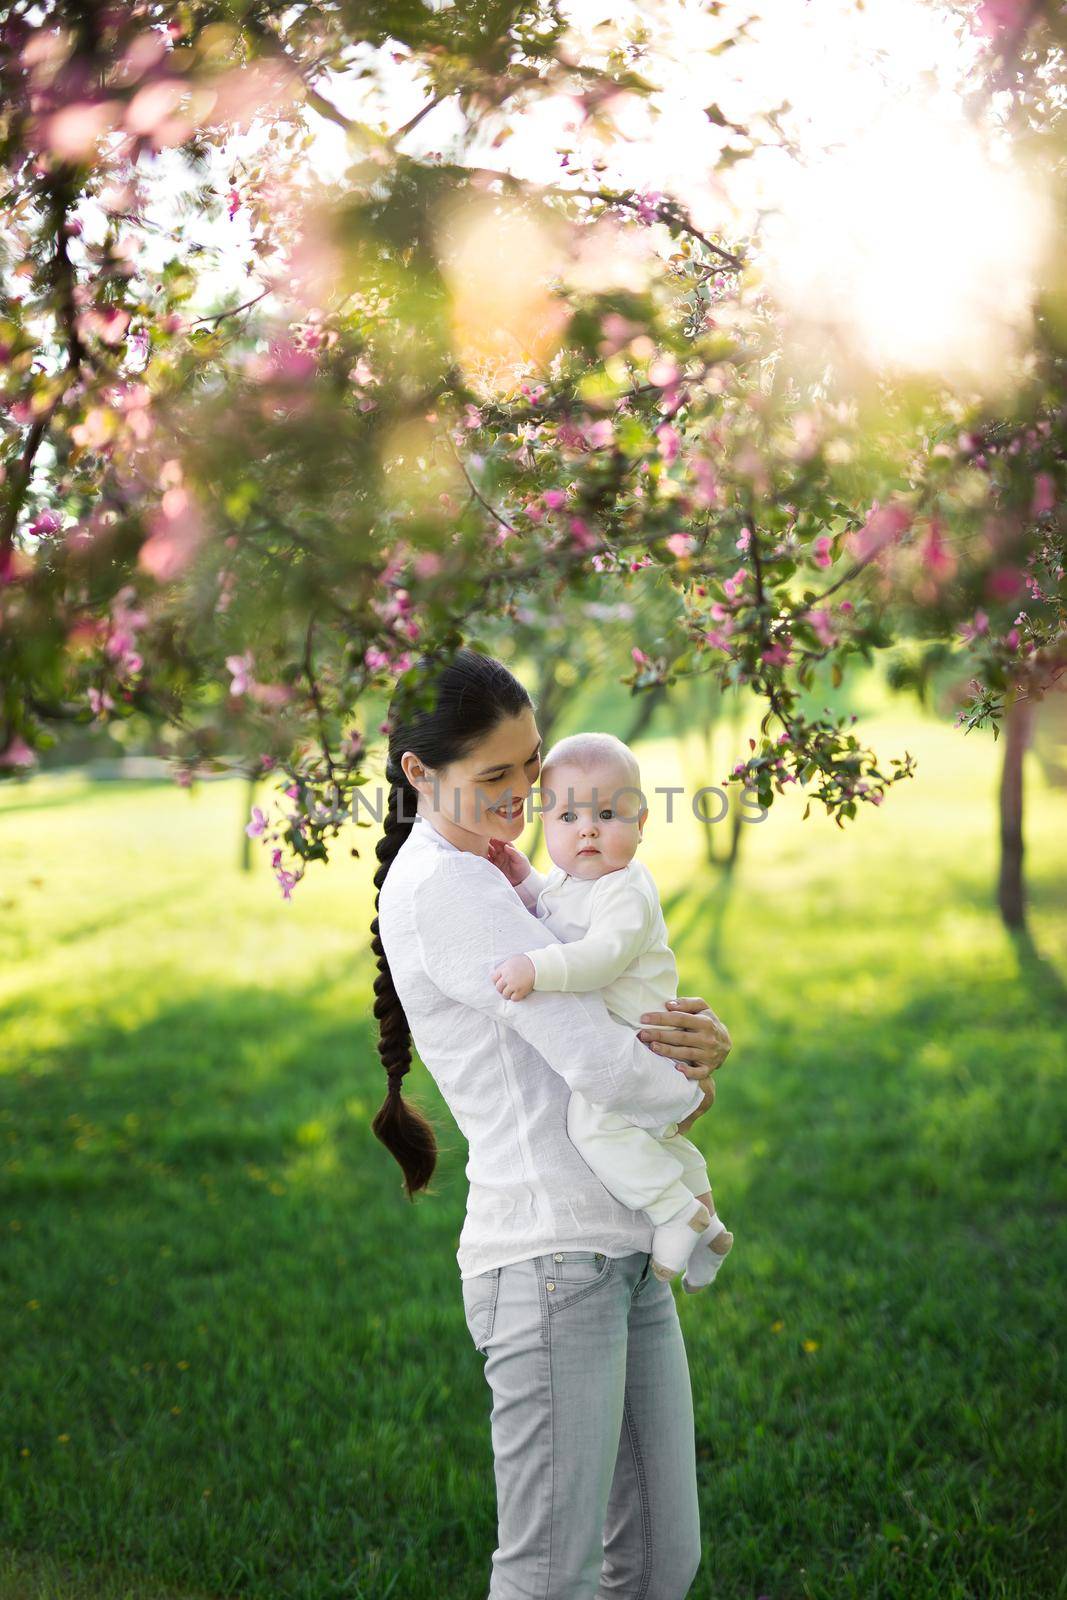 Portrait Beautiful Mother And Baby outdoors. Nature. Beauty Mum and her Child playing in Park